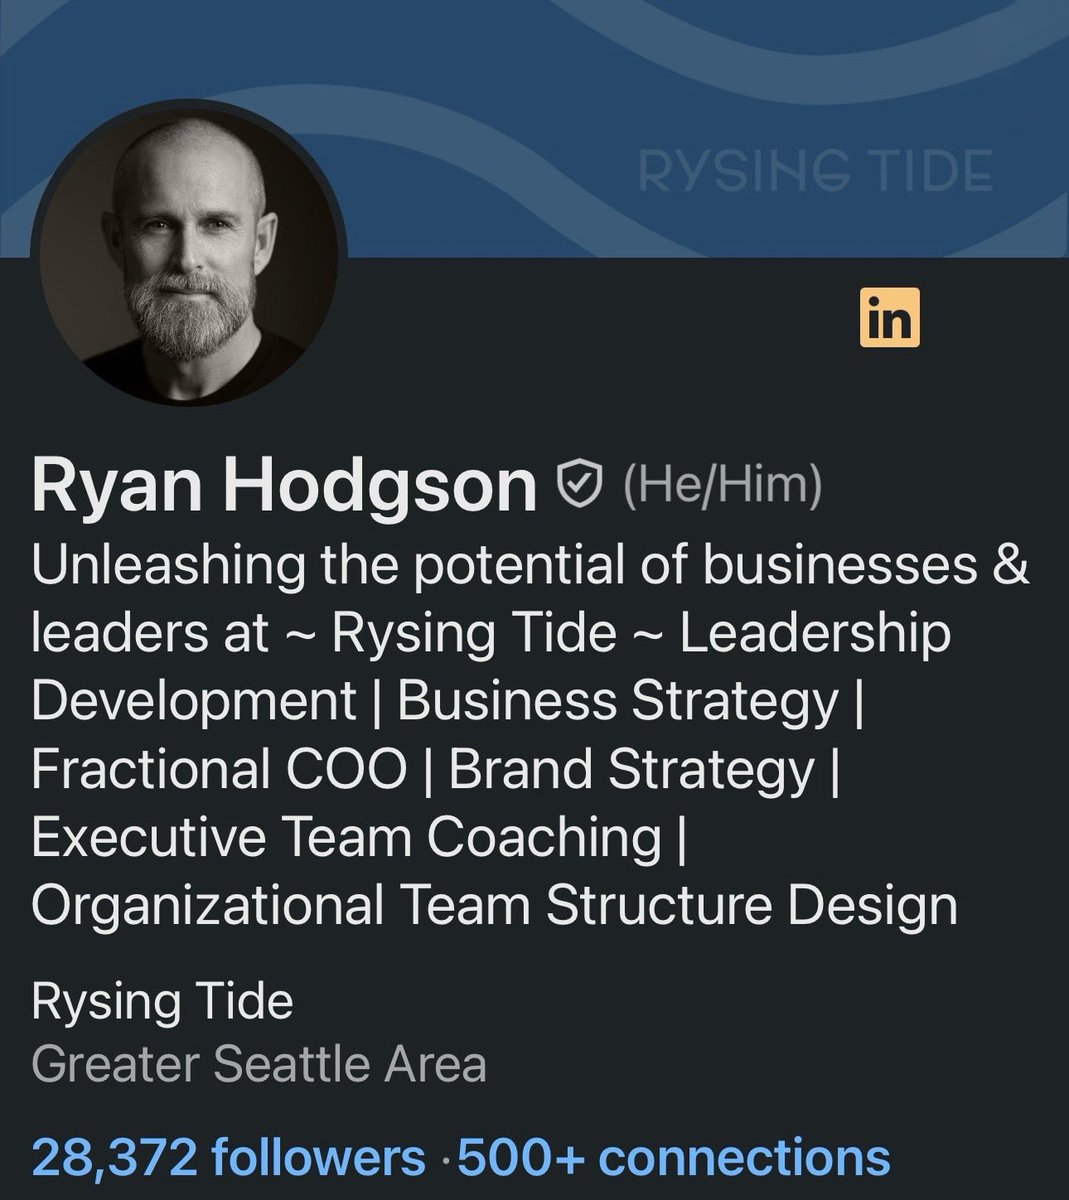 Let’s network and connect on LinkedIn! Follow me for inspiring quotes and powerful affirmations. Your mindset shift begins today. linkedin.com/in/ryanhodgson #LinkedIn #business #leadership #networking